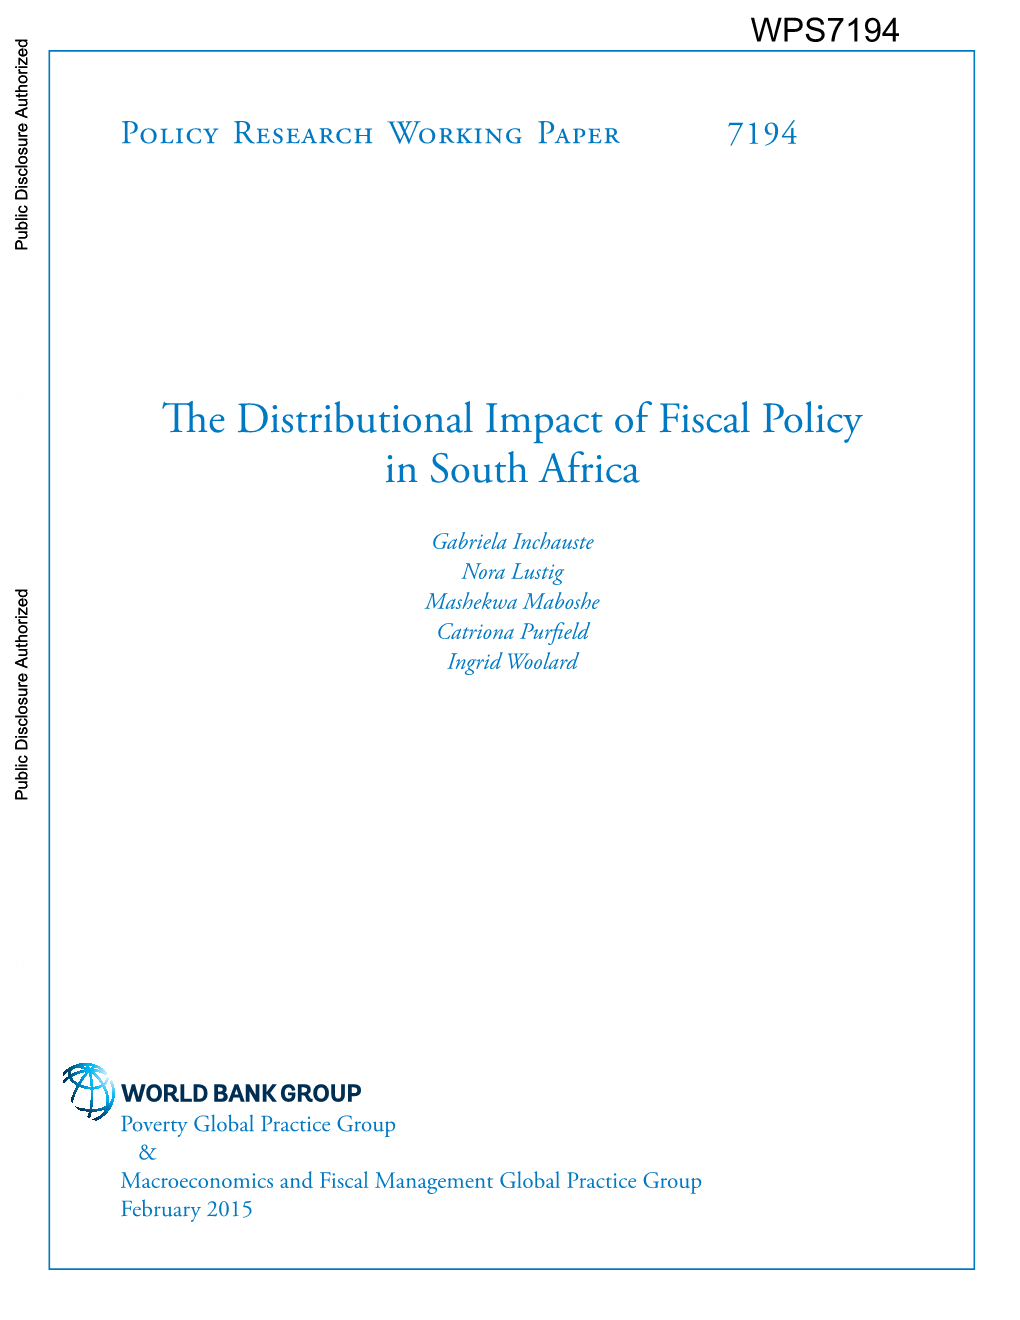 The Distributional Impact of Fiscal Policy in South Africa